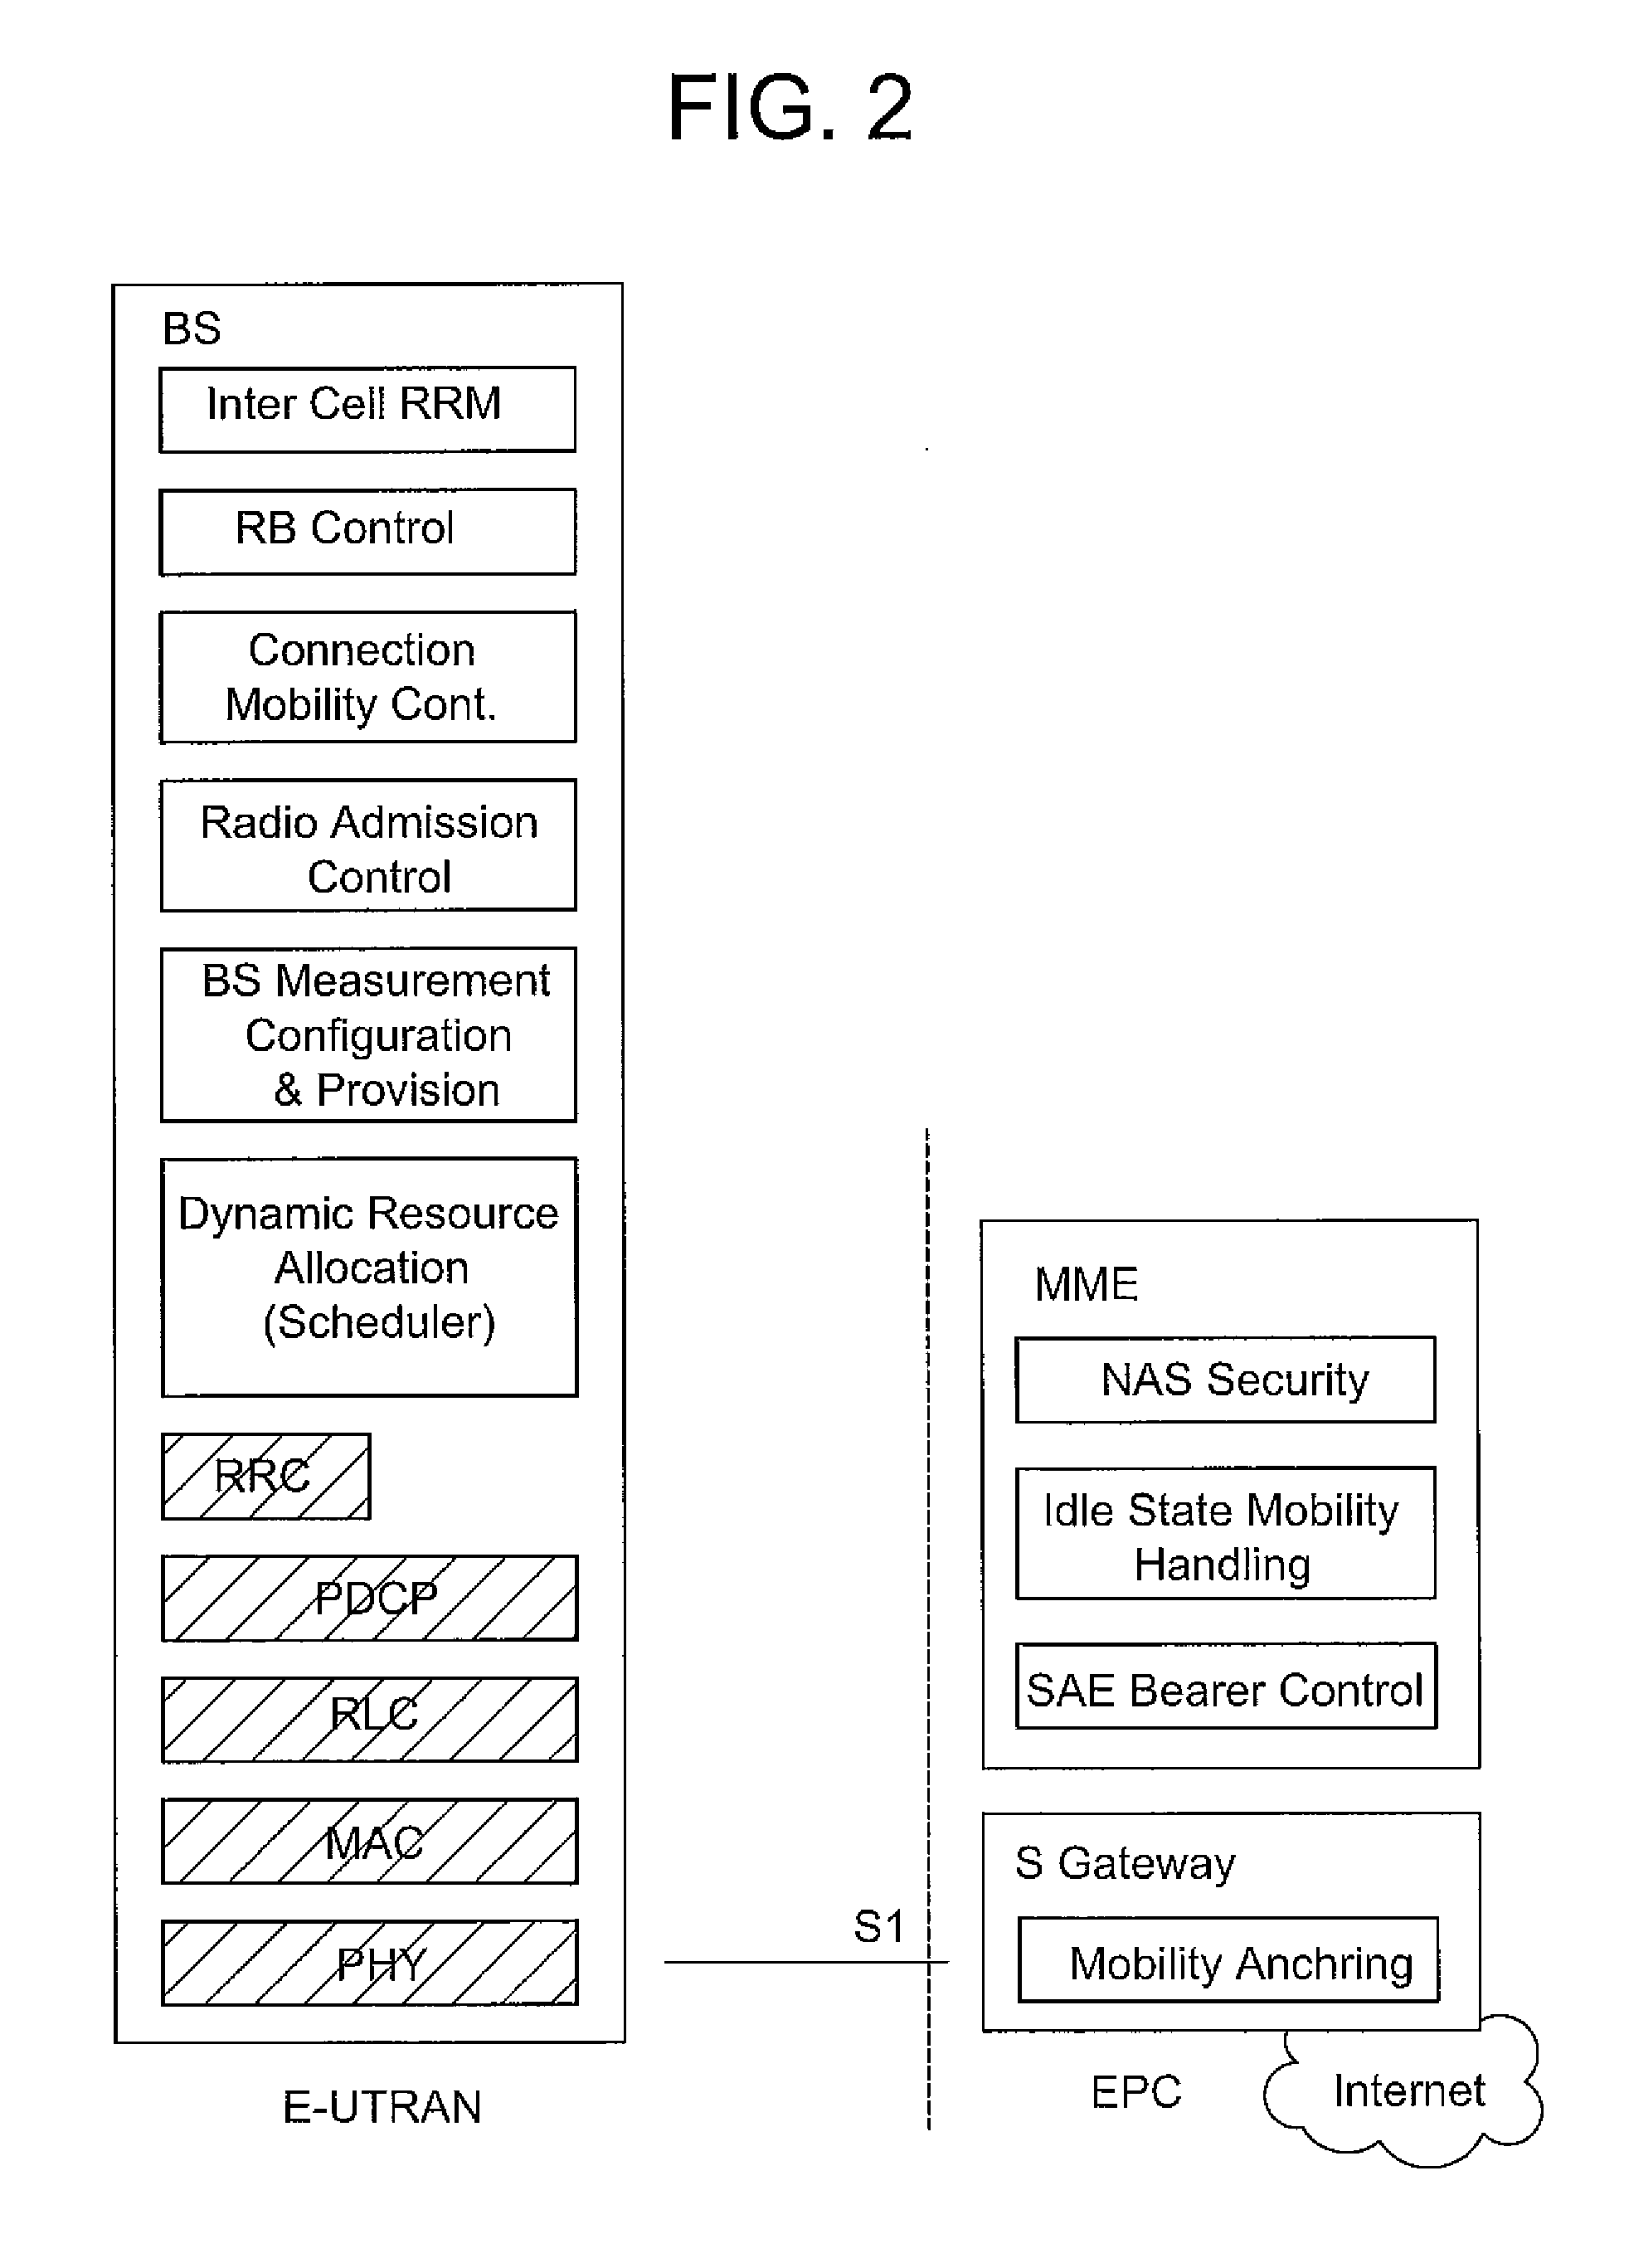 Method for performing handover procedure and creating data